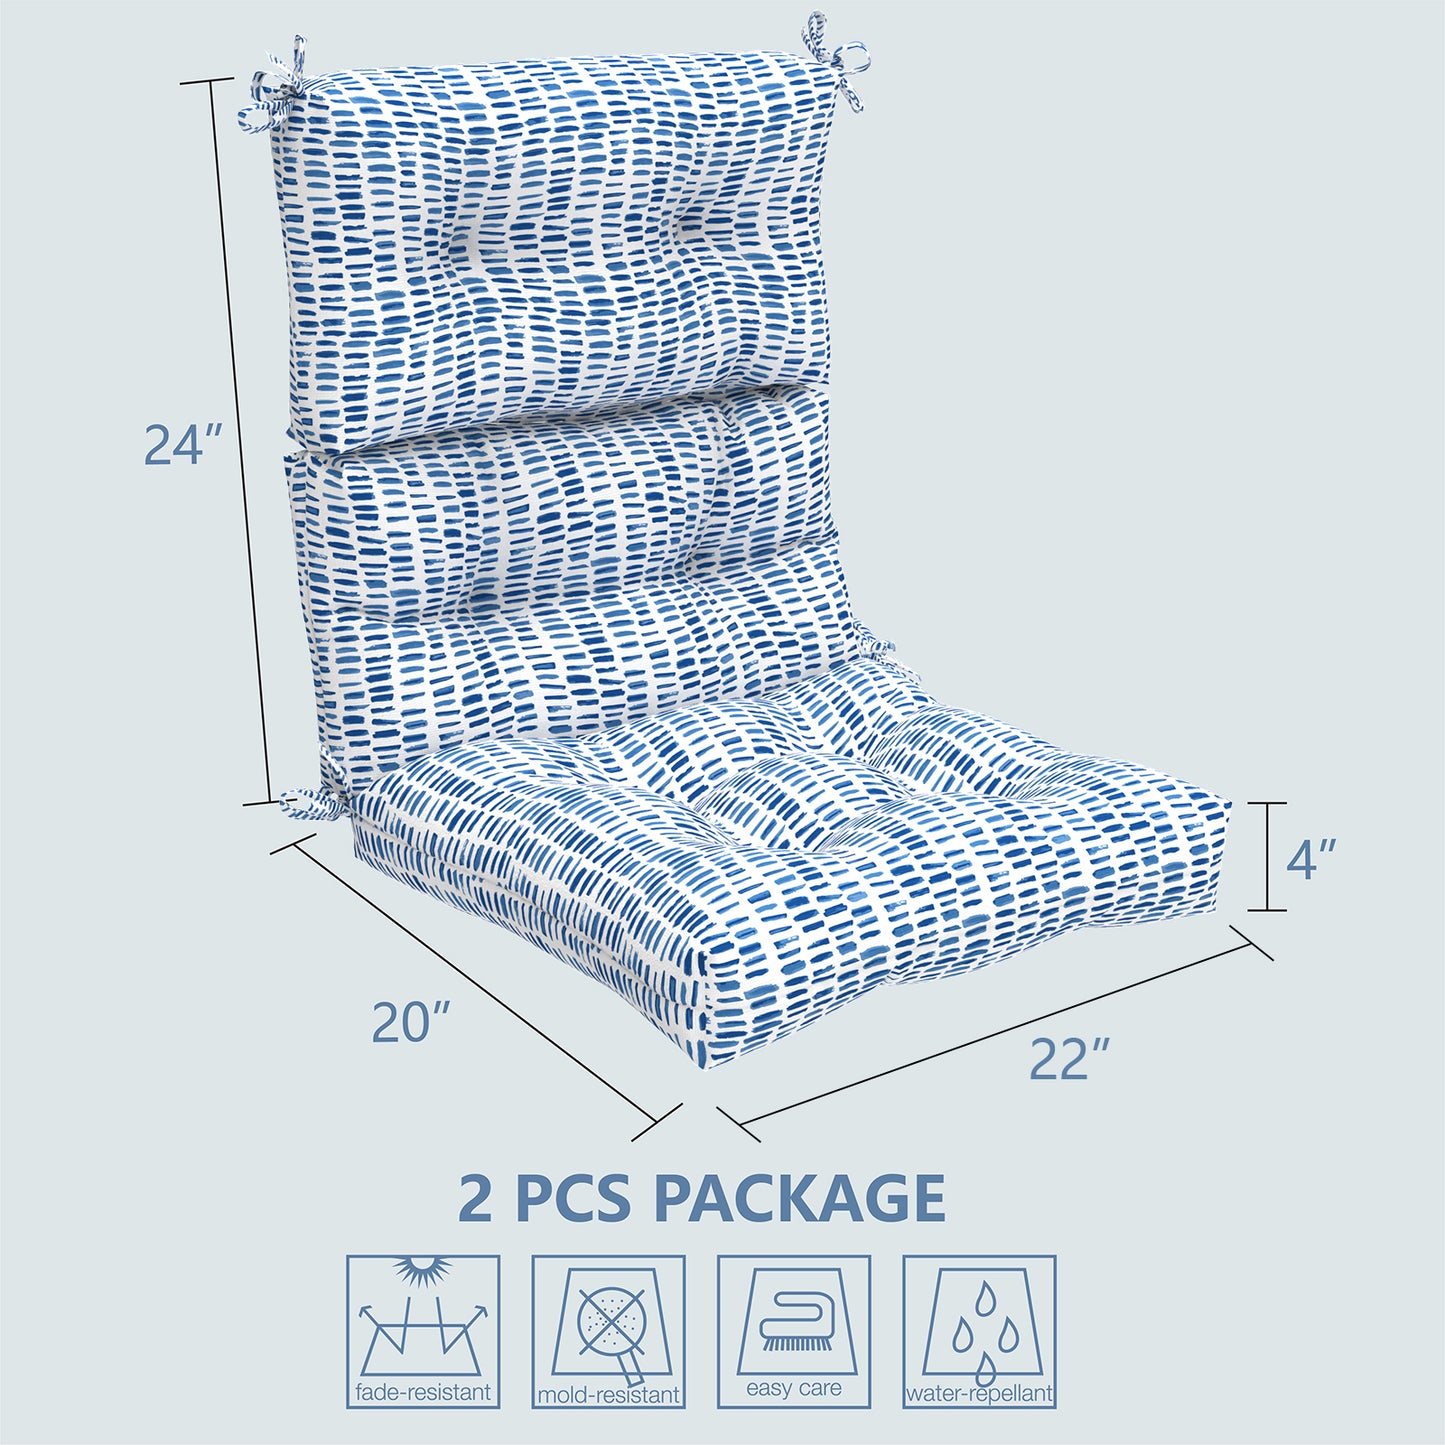 Melody Elephant Outdoor Tufted High Back Chair Cushions, Water Resistant Rocking Seat Chair Cushions 2 Pack, Adirondack Cushions for Patio Home Garden, 22" W x 20" D, Pebble Blue